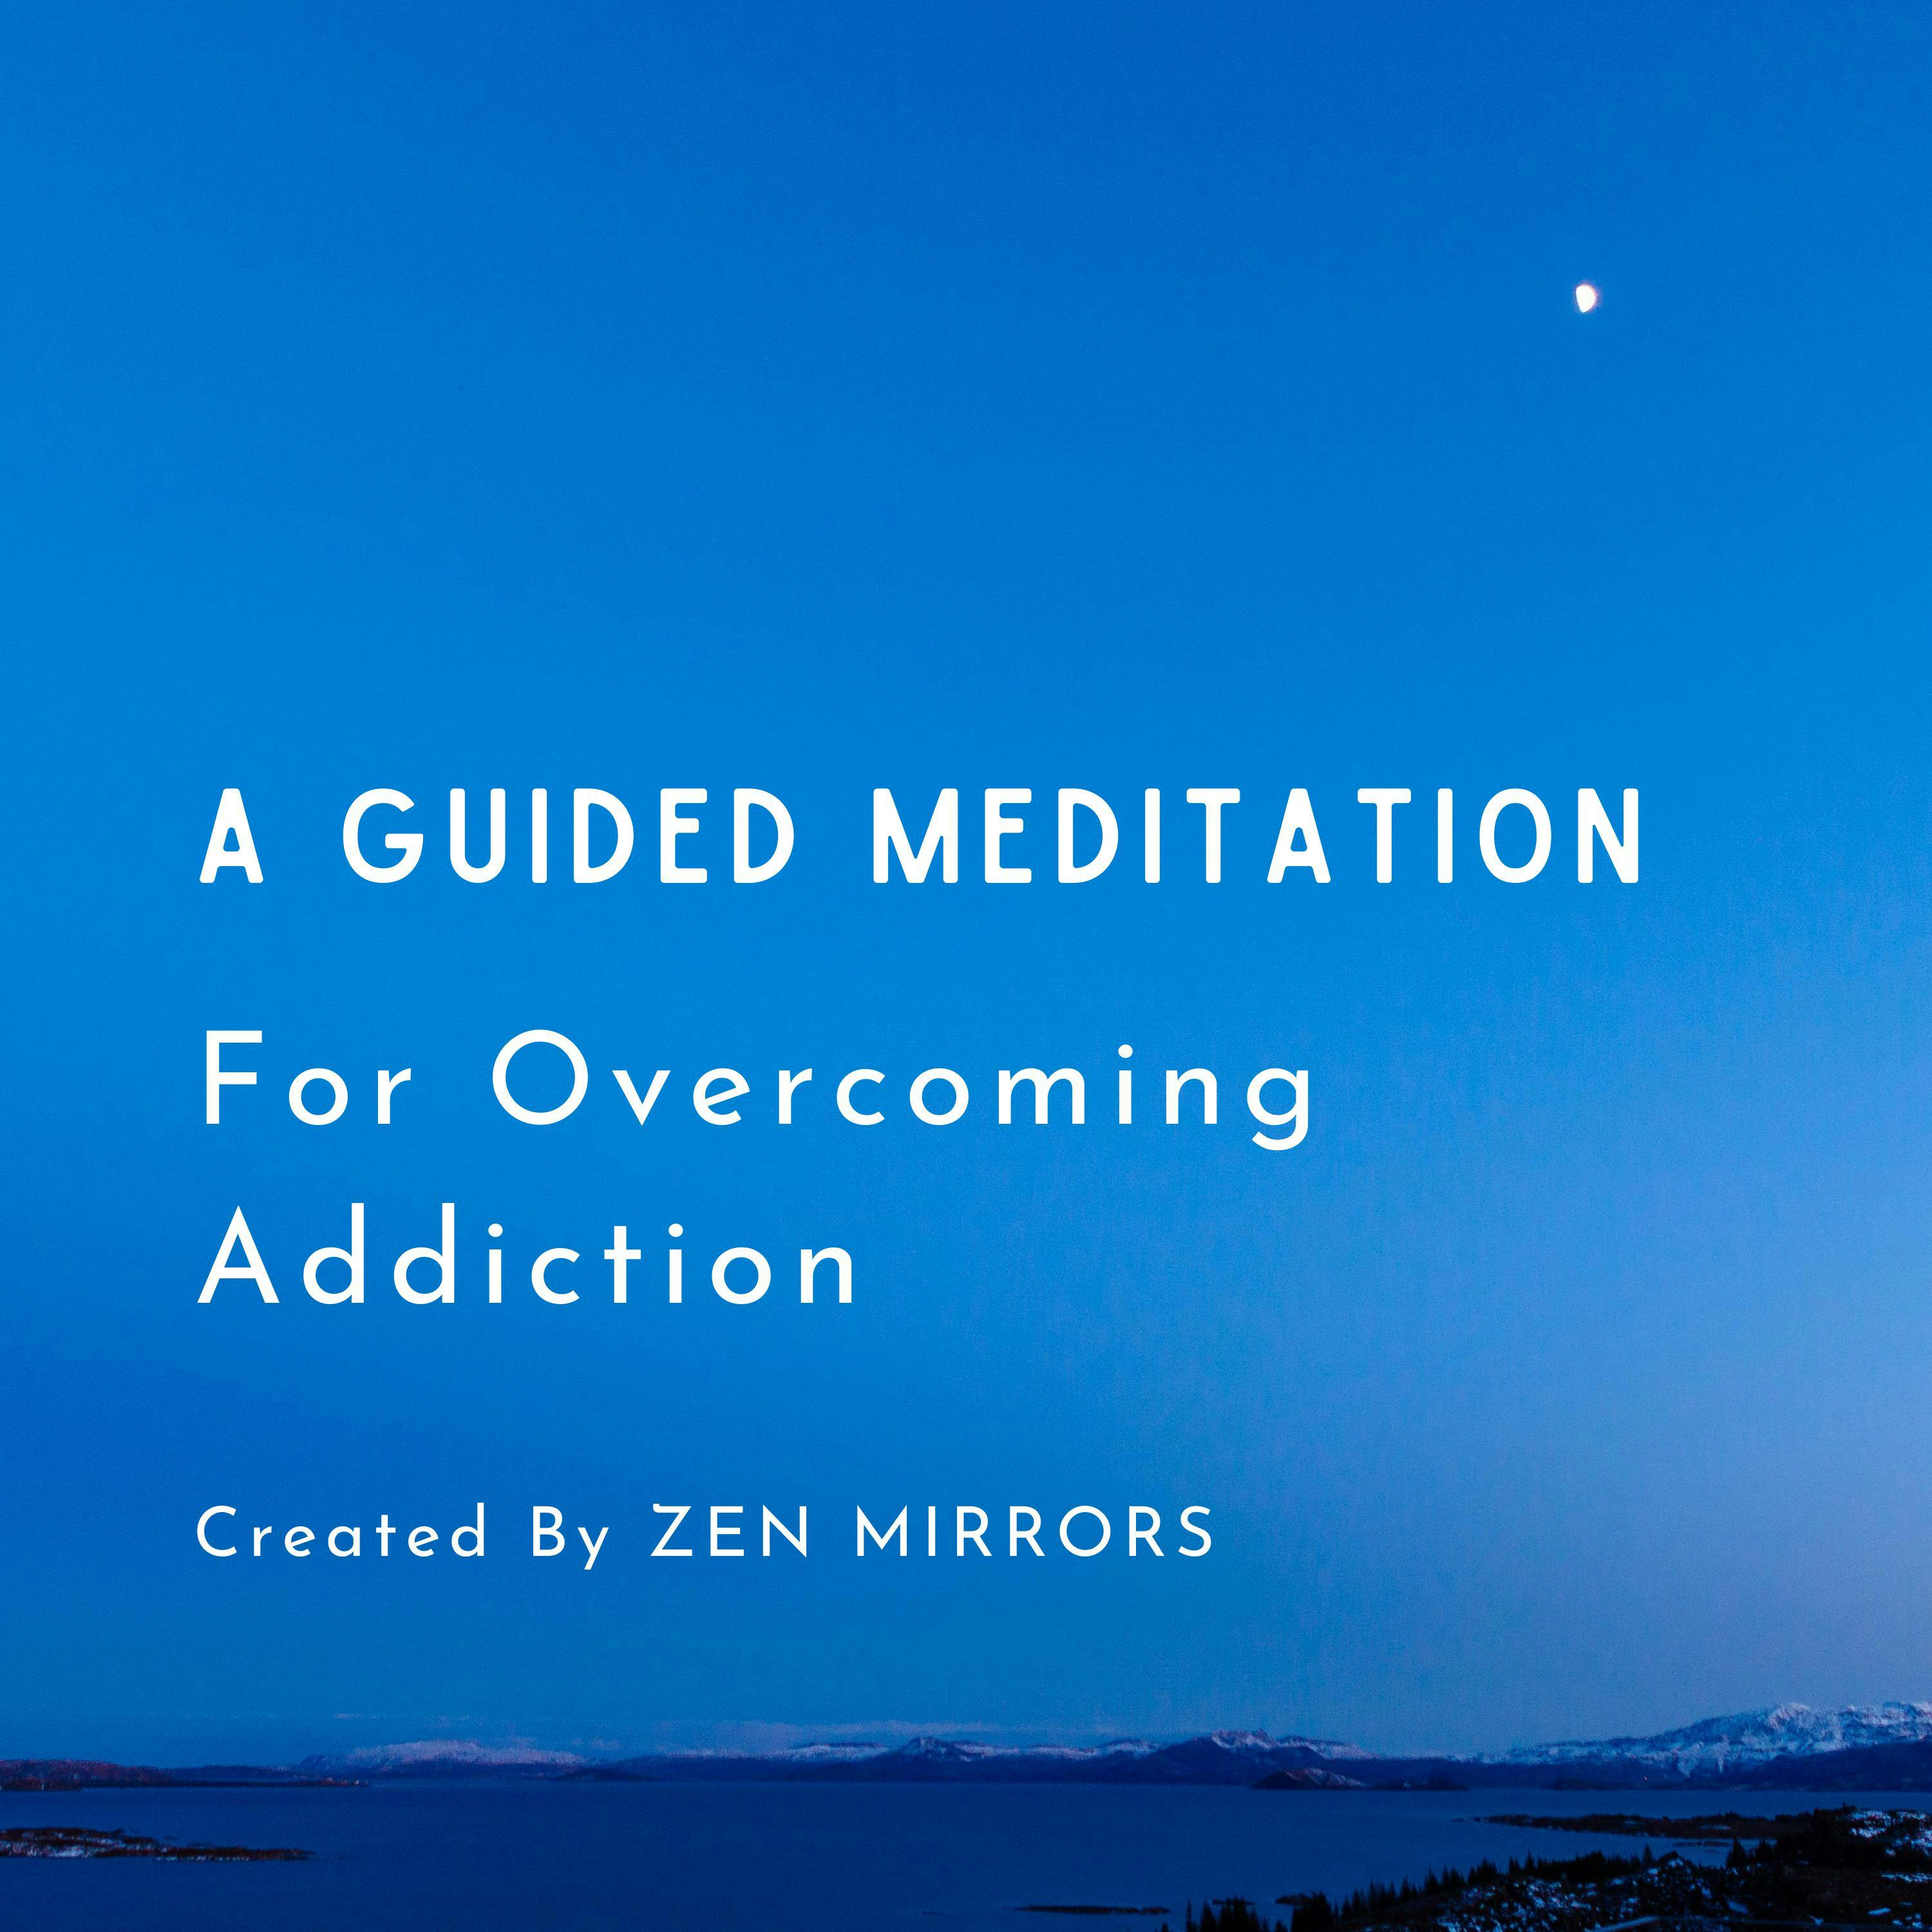 A Guided Meditation To Overcome Addiction - undefined